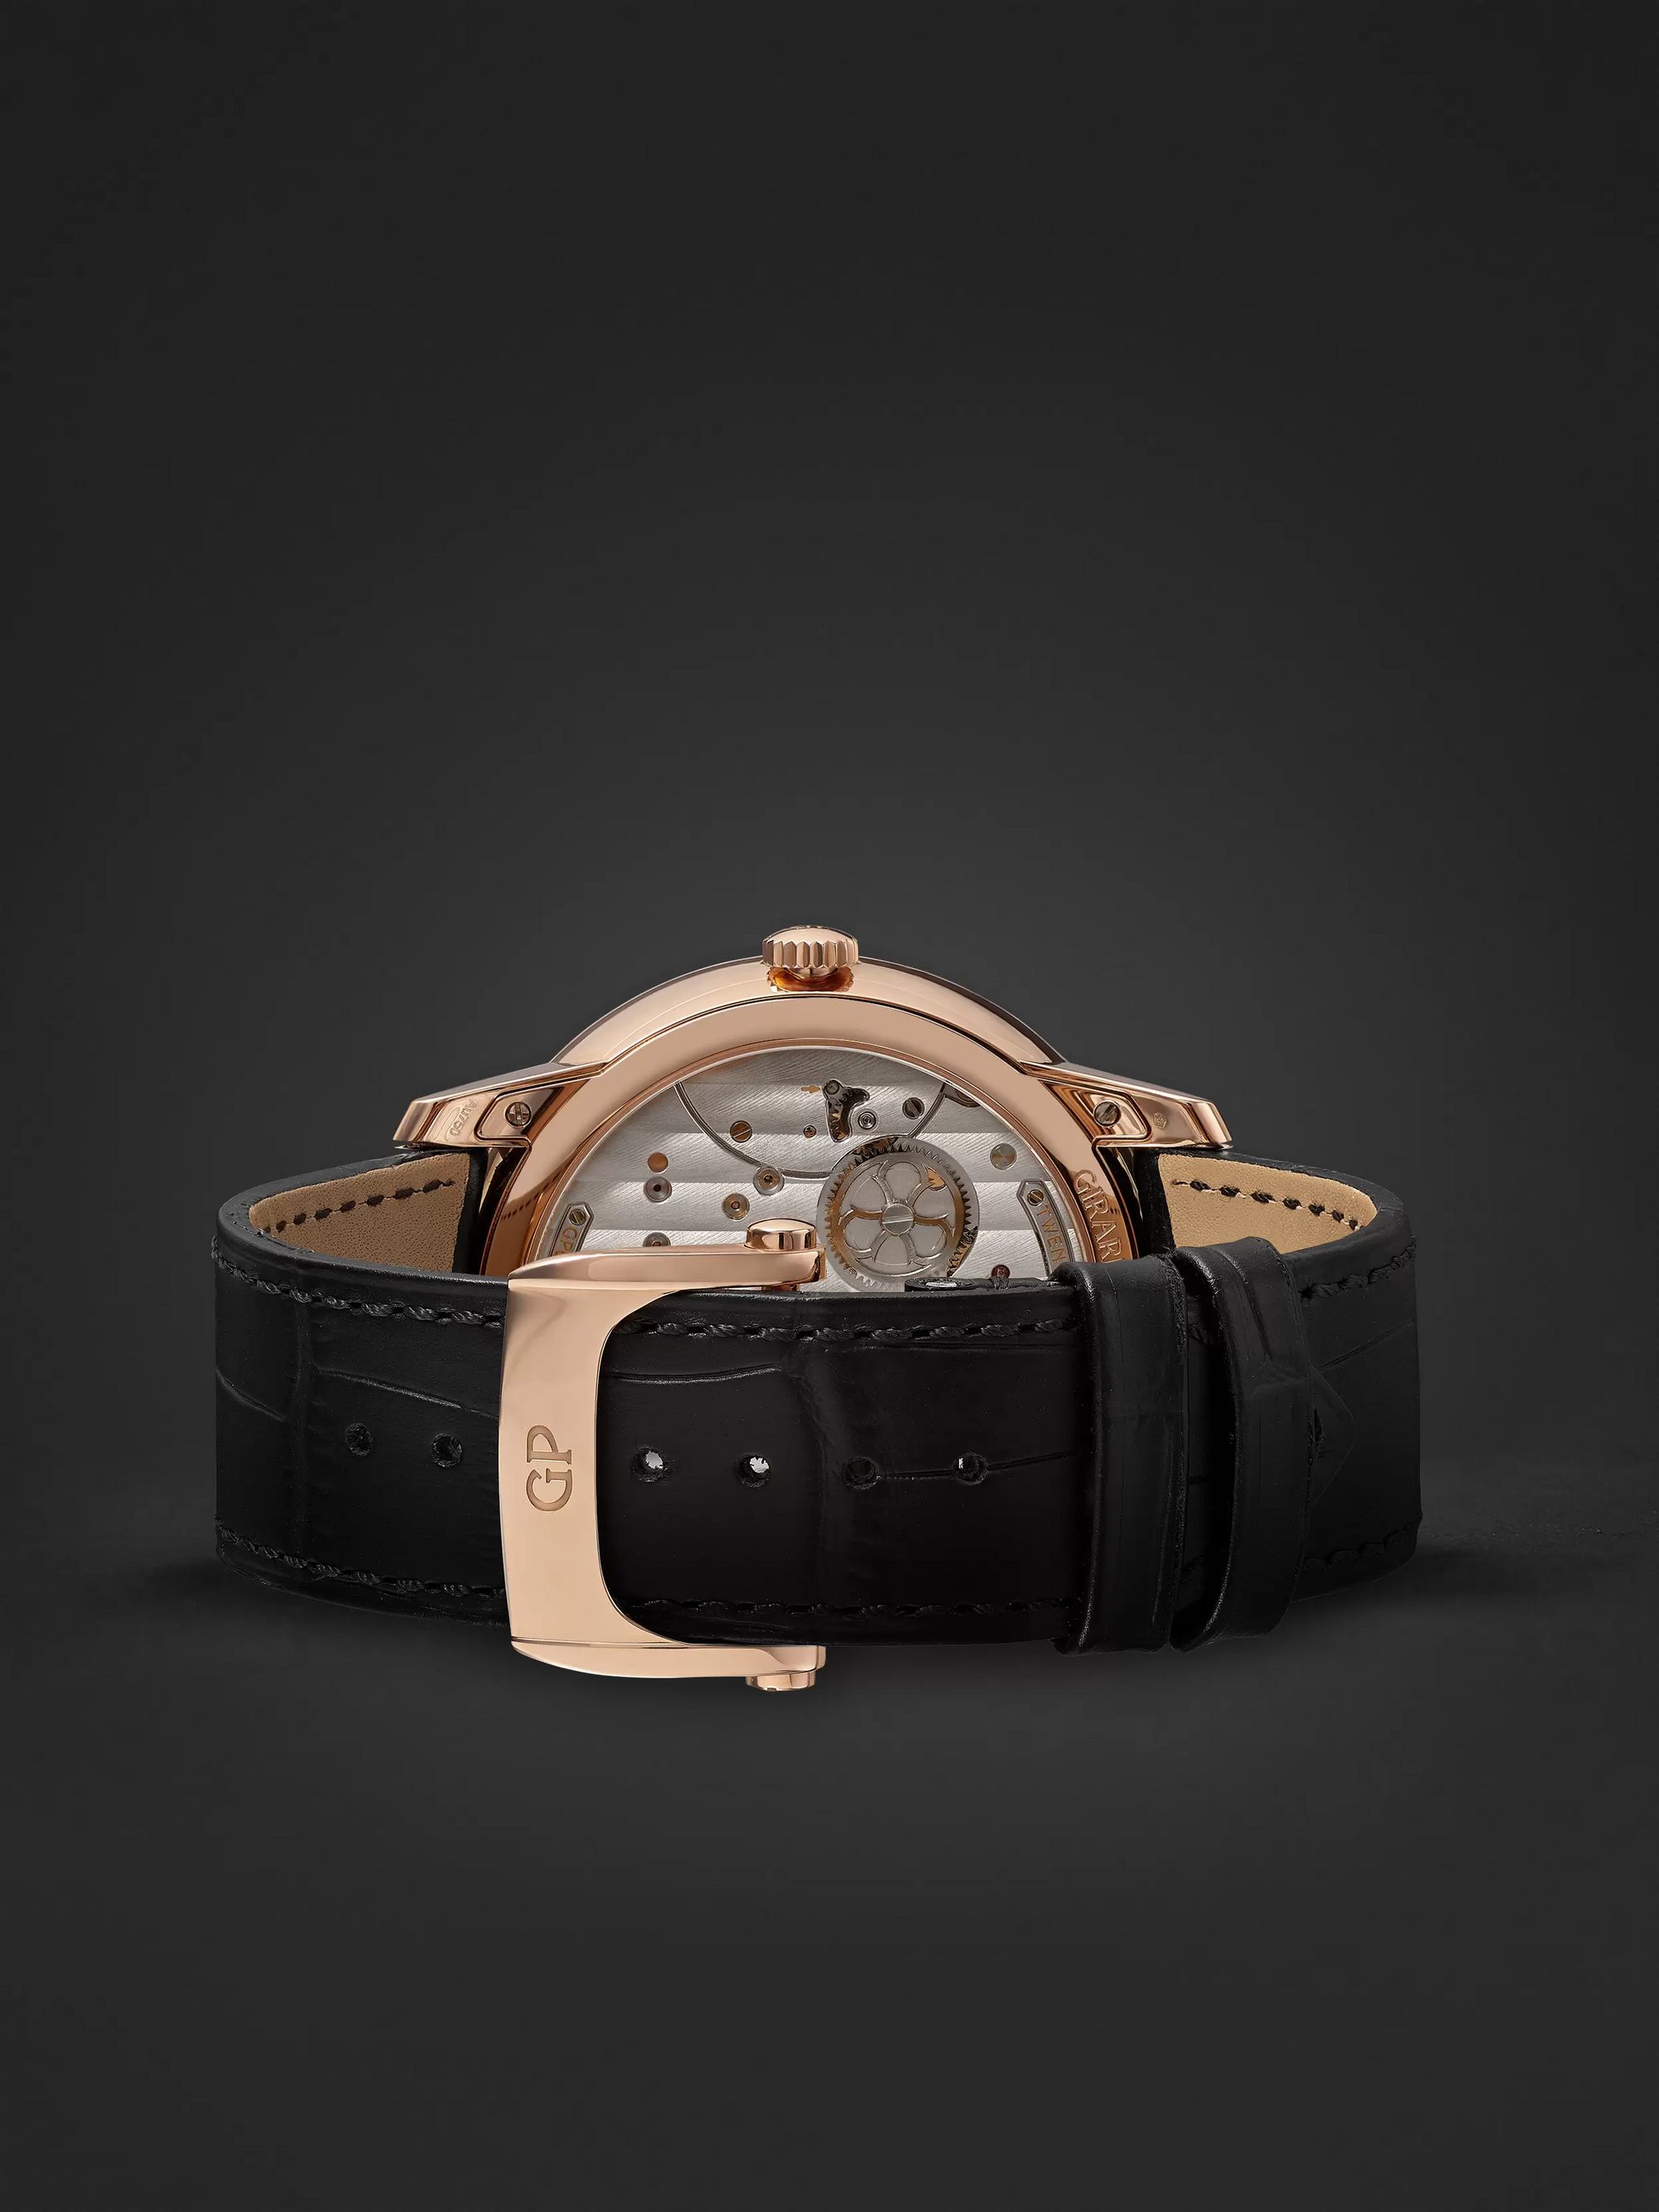 GIRARD-PERREGAUX Classic Bridges Automatic Skeleton 45mm Rose Gold and Alligator Watch, Ref. No. 86000-52-001-BB6A